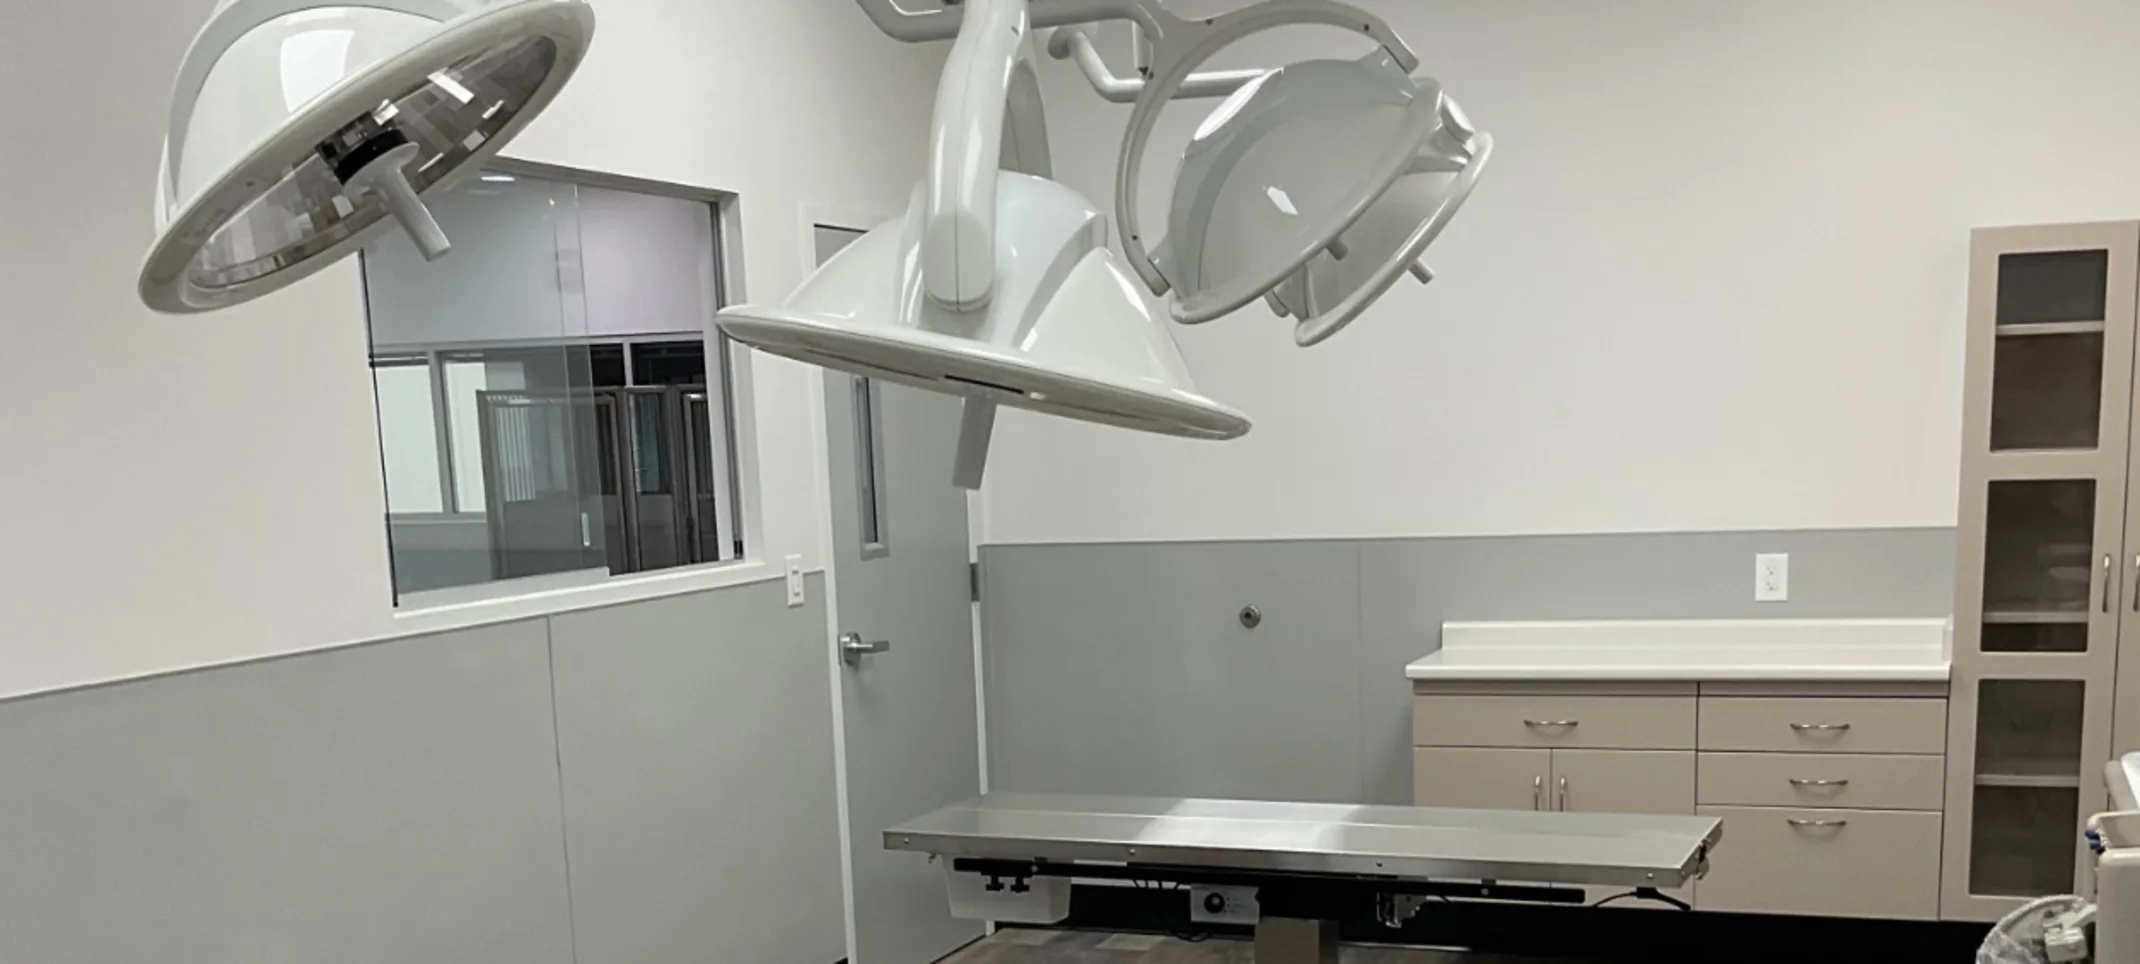 Exam room with lights, a table, and counter space